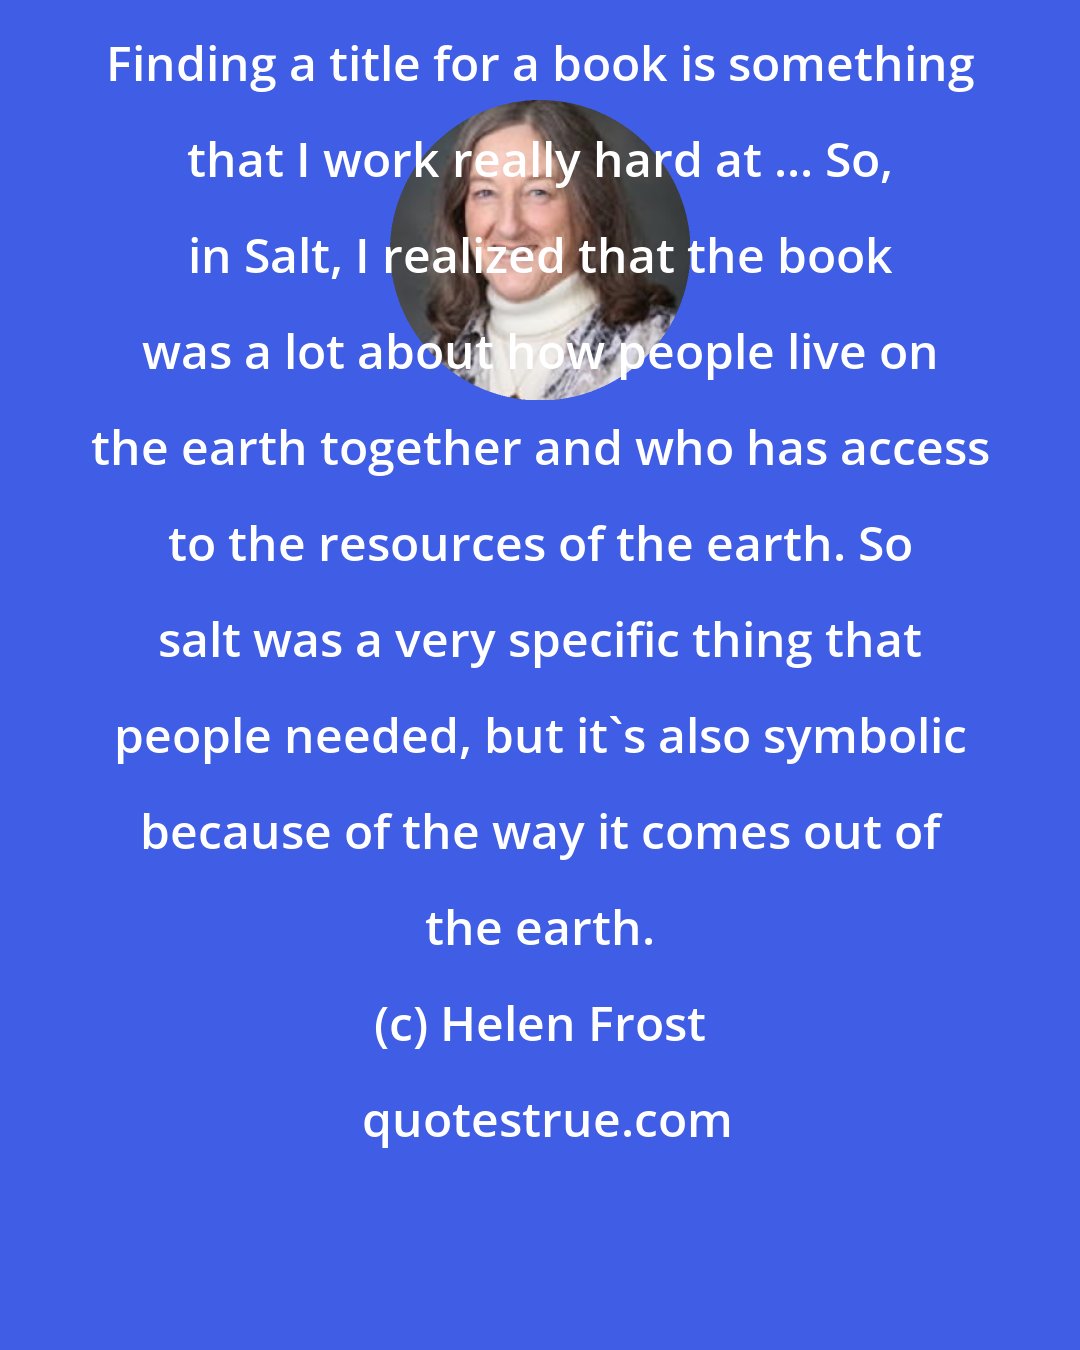 Helen Frost: Finding a title for a book is something that I work really hard at ... So, in Salt, I realized that the book was a lot about how people live on the earth together and who has access to the resources of the earth. So salt was a very specific thing that people needed, but it's also symbolic because of the way it comes out of the earth.